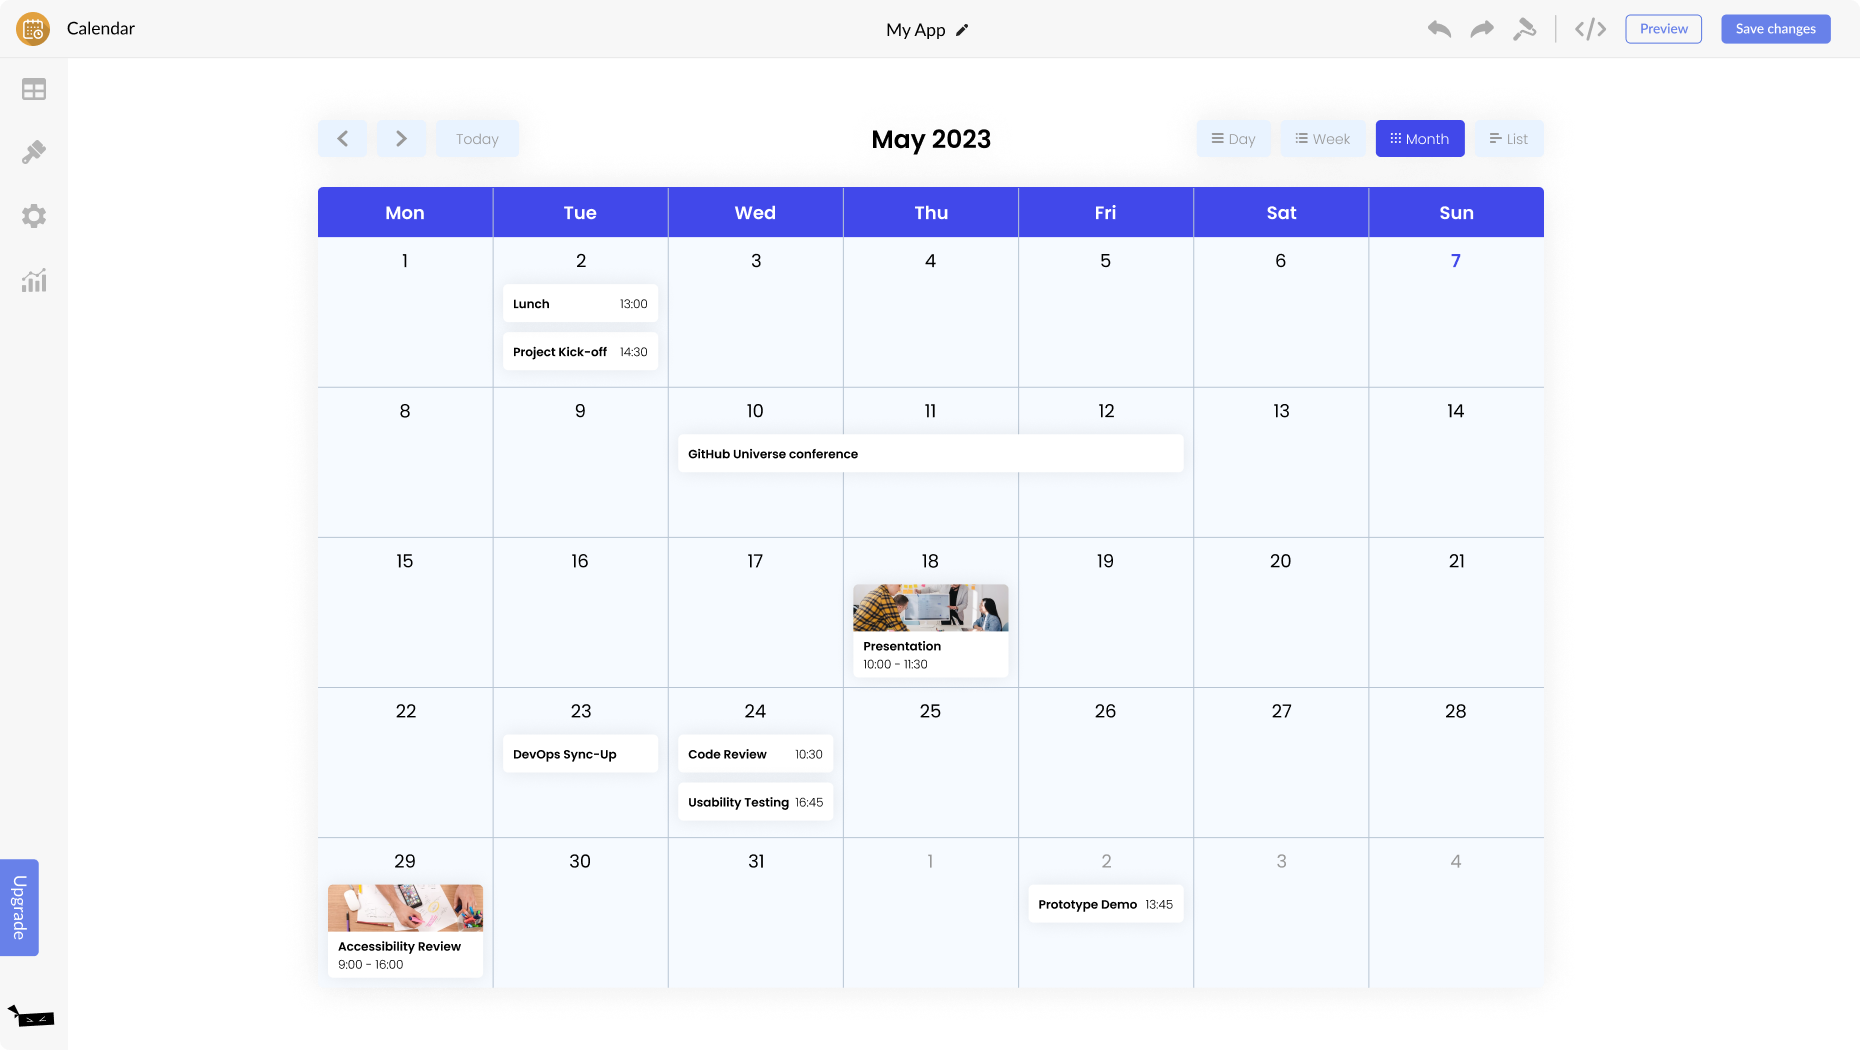 Calendar for Weebly